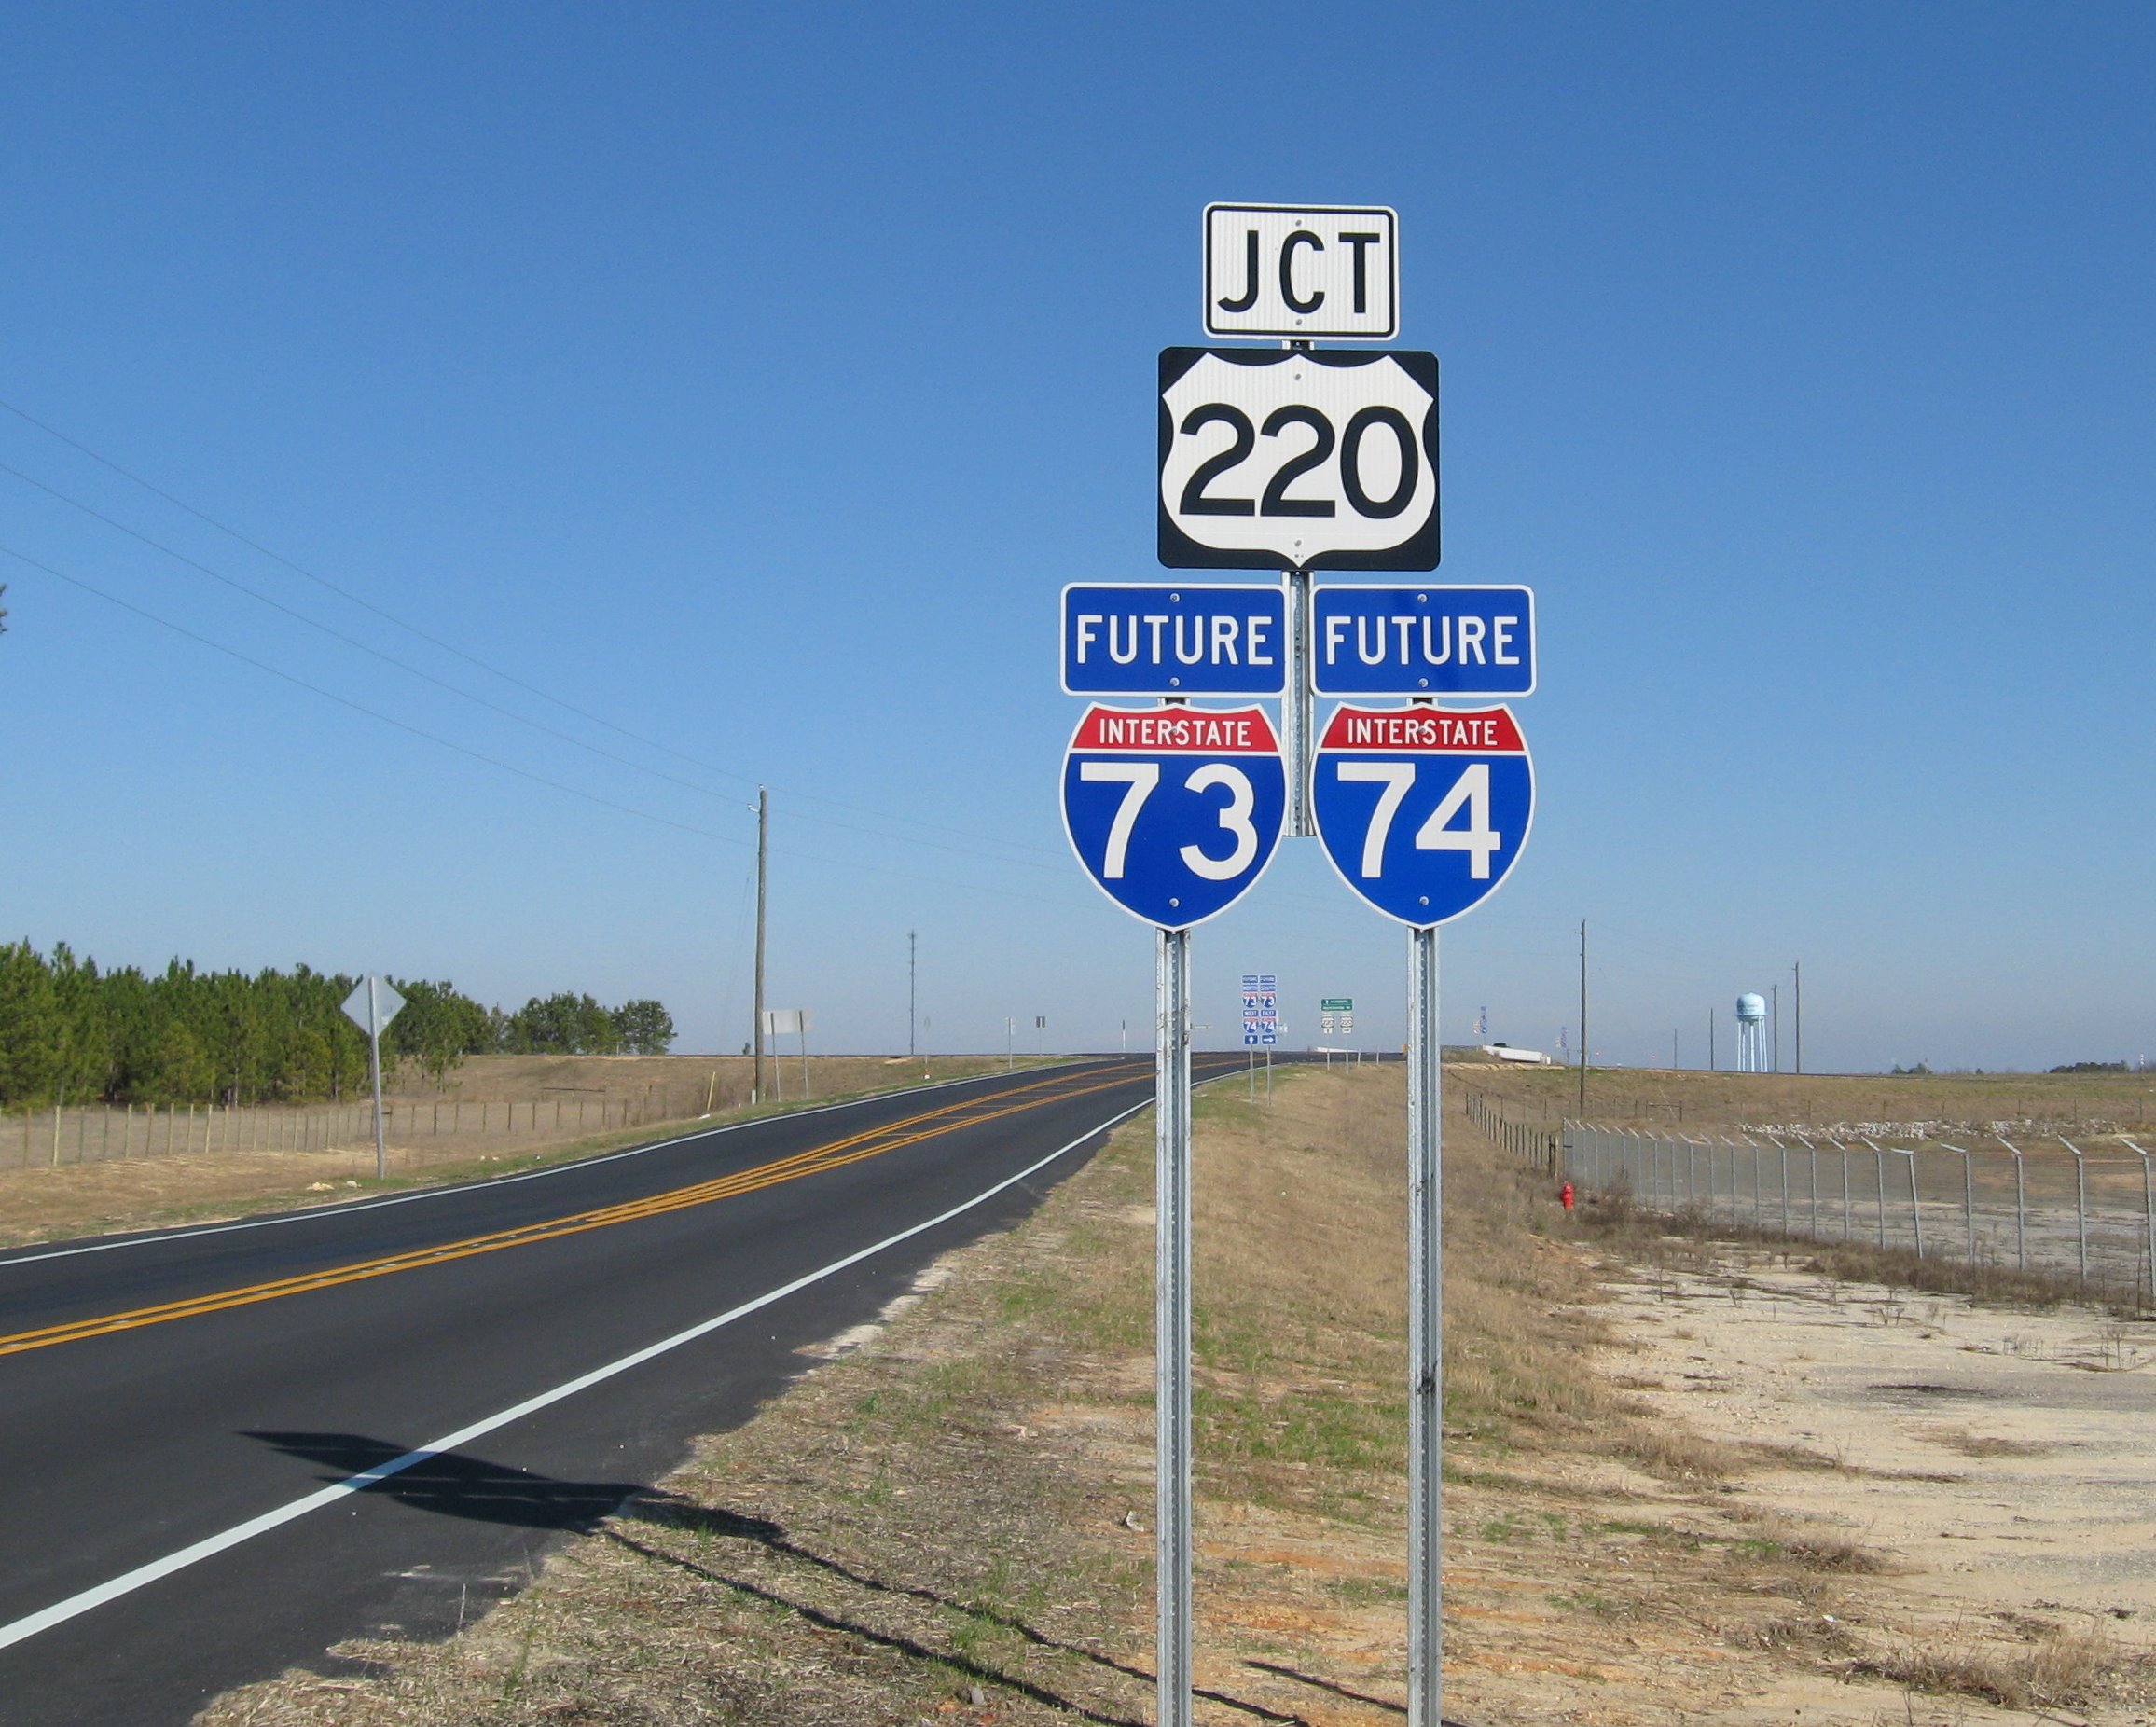 Photo of Future I-73/I-74 and US 220 Sign Assembly at NC 73 Interchange, 
Jan. 2008